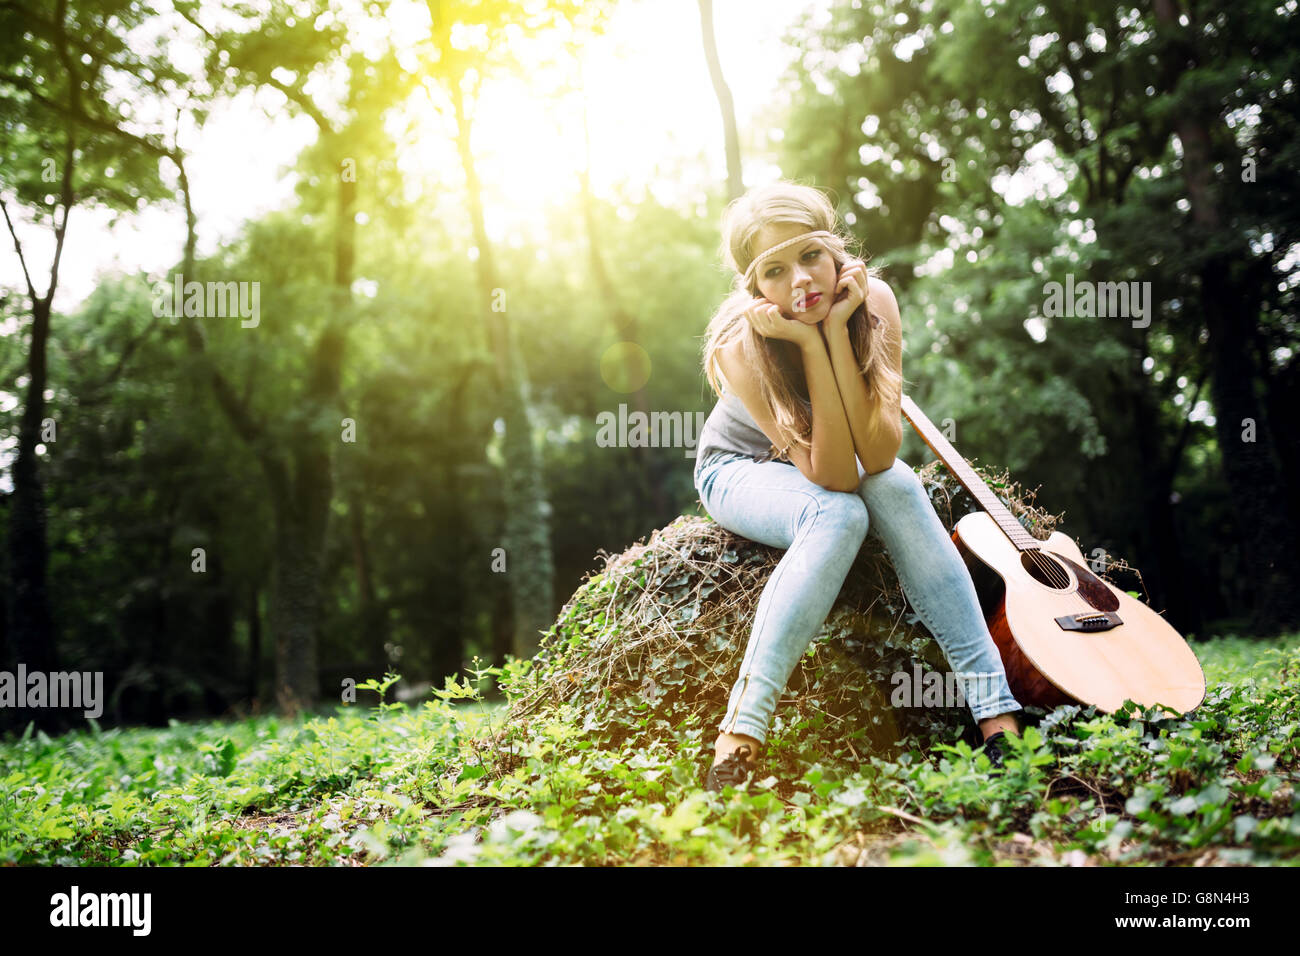 Depressed girl filling void after breakup in nature Stock Photo